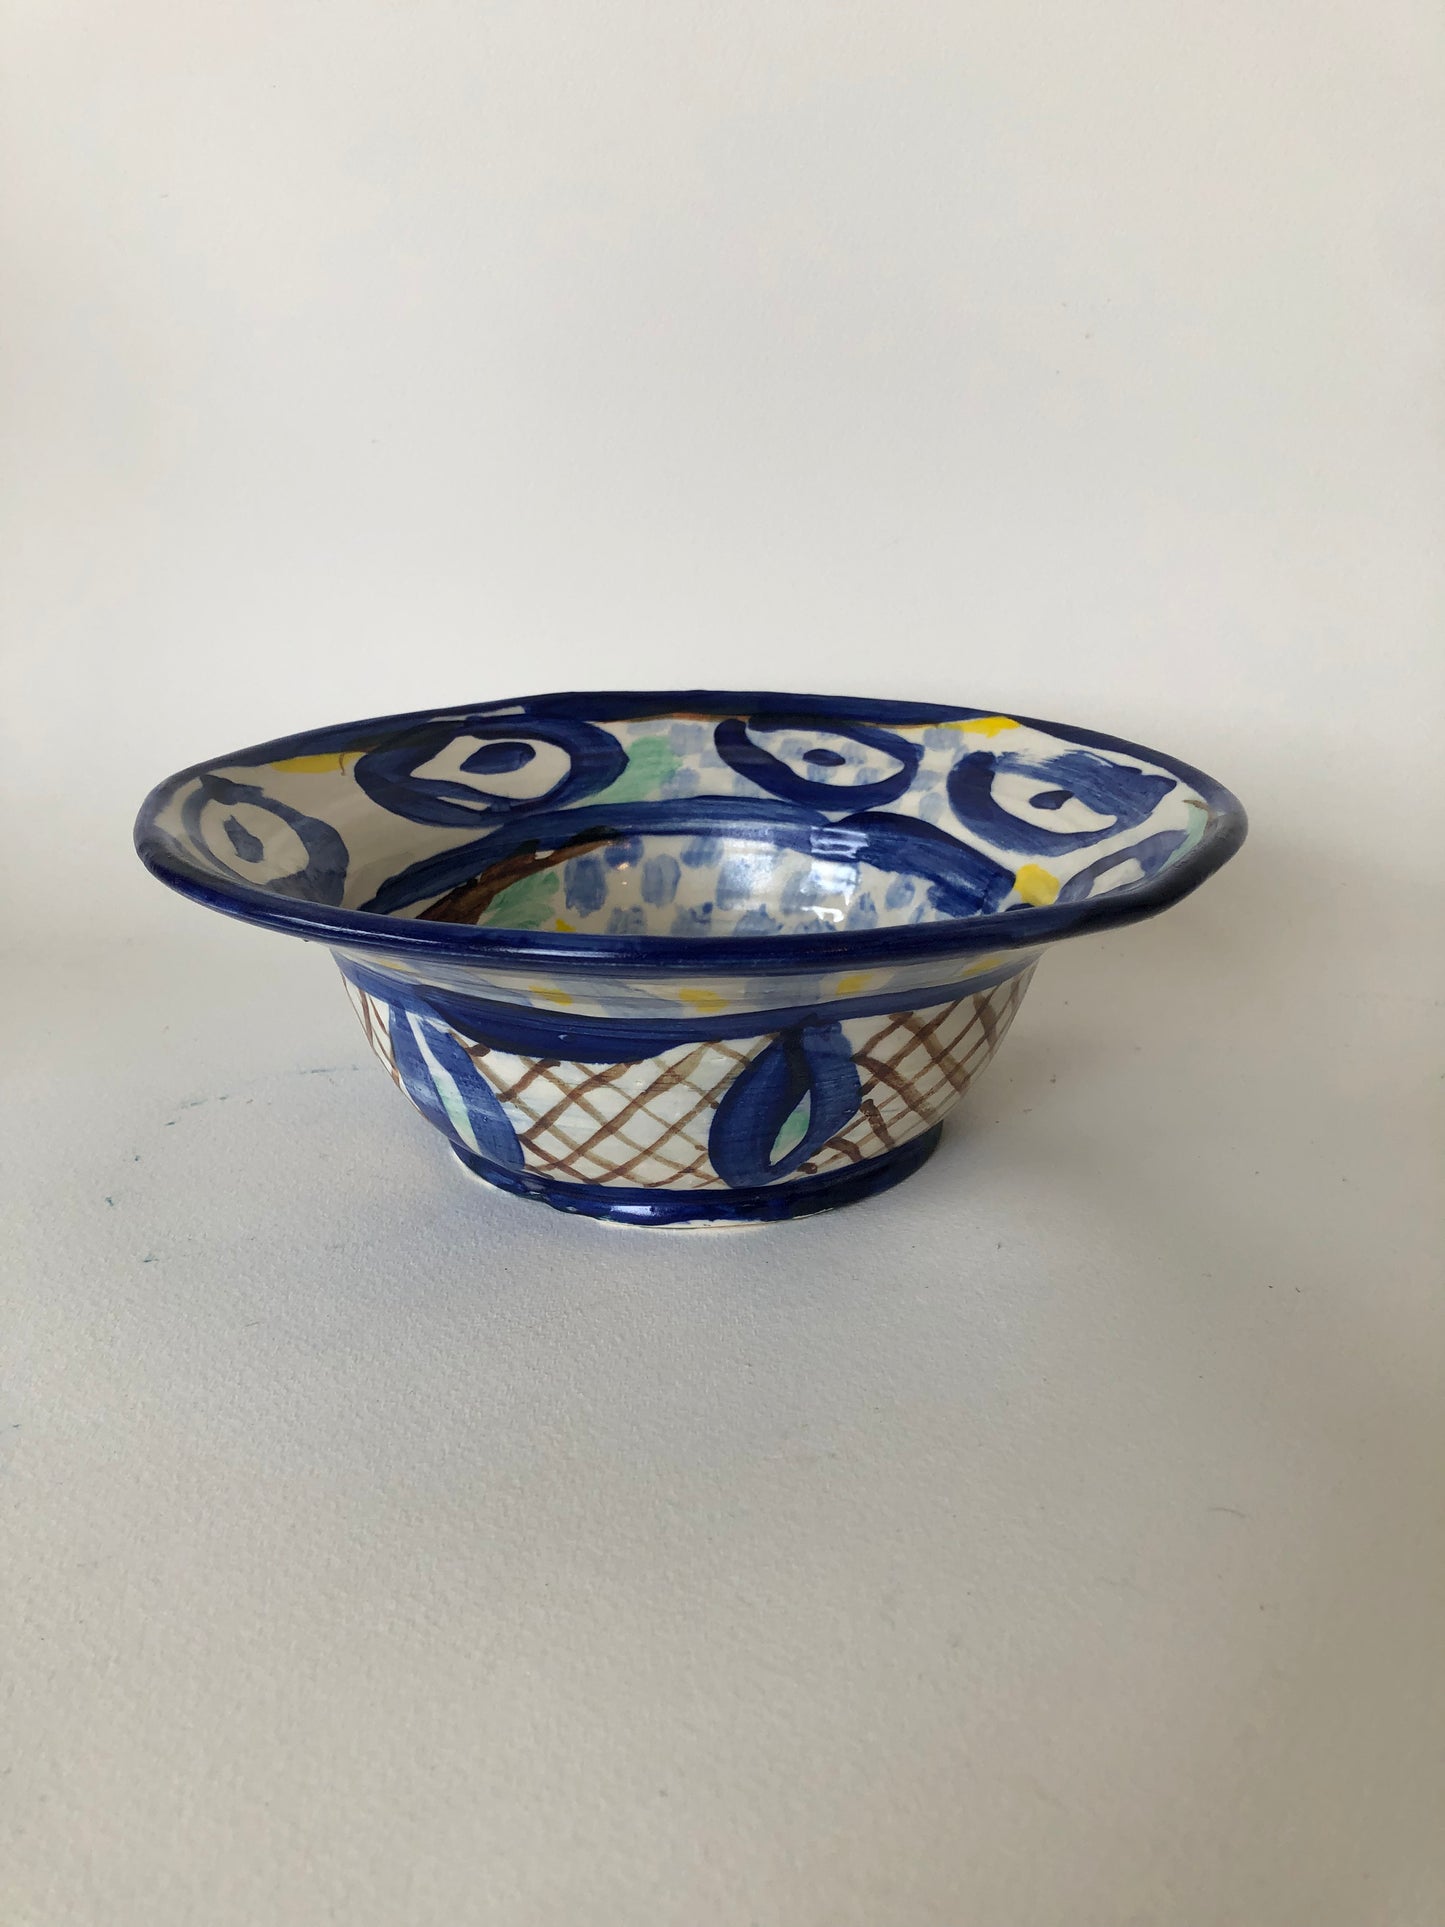 Bloomsbury Check bowl in Indigo and brown